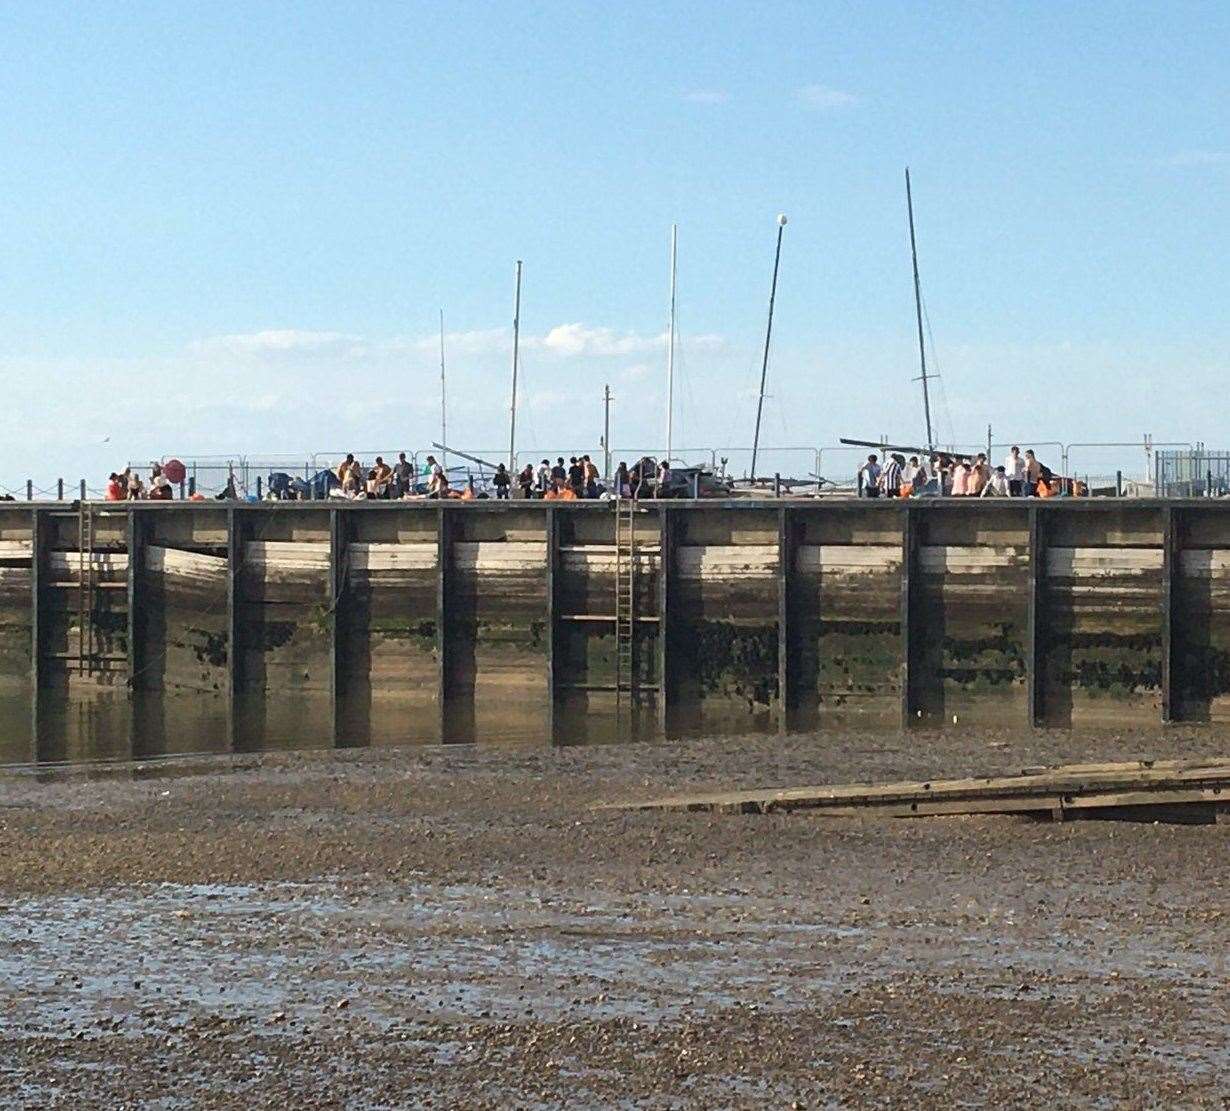 Crowds gathering at the harbour during the day. Picture: Cathryn Epton